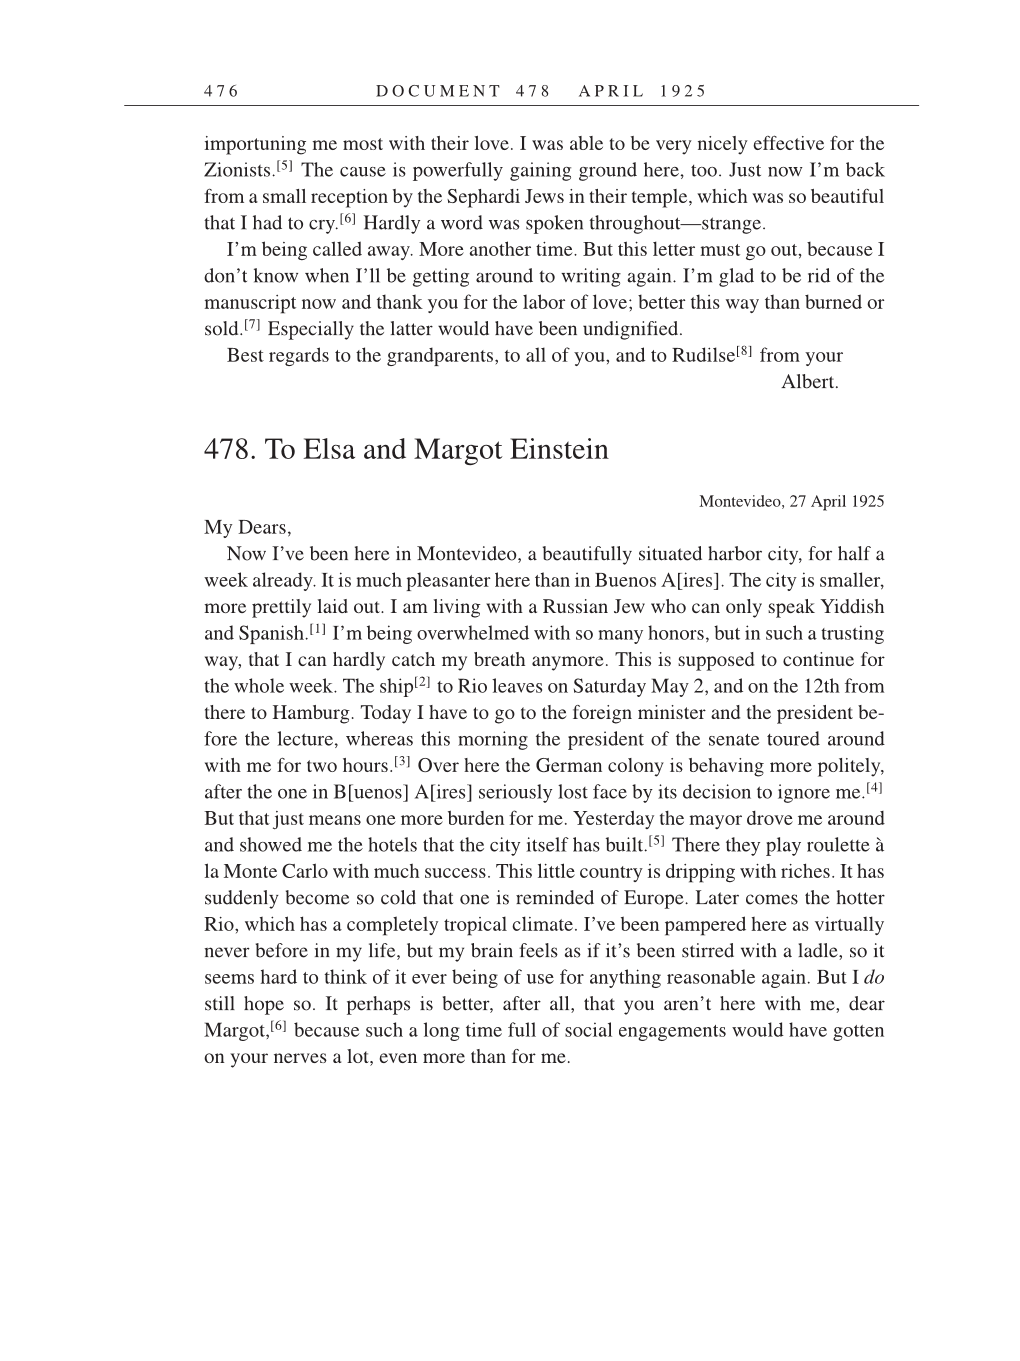 Volume 14: The Berlin Years: Writings & Correspondence, April 1923-May 1925 (English Translation Supplement) page 476